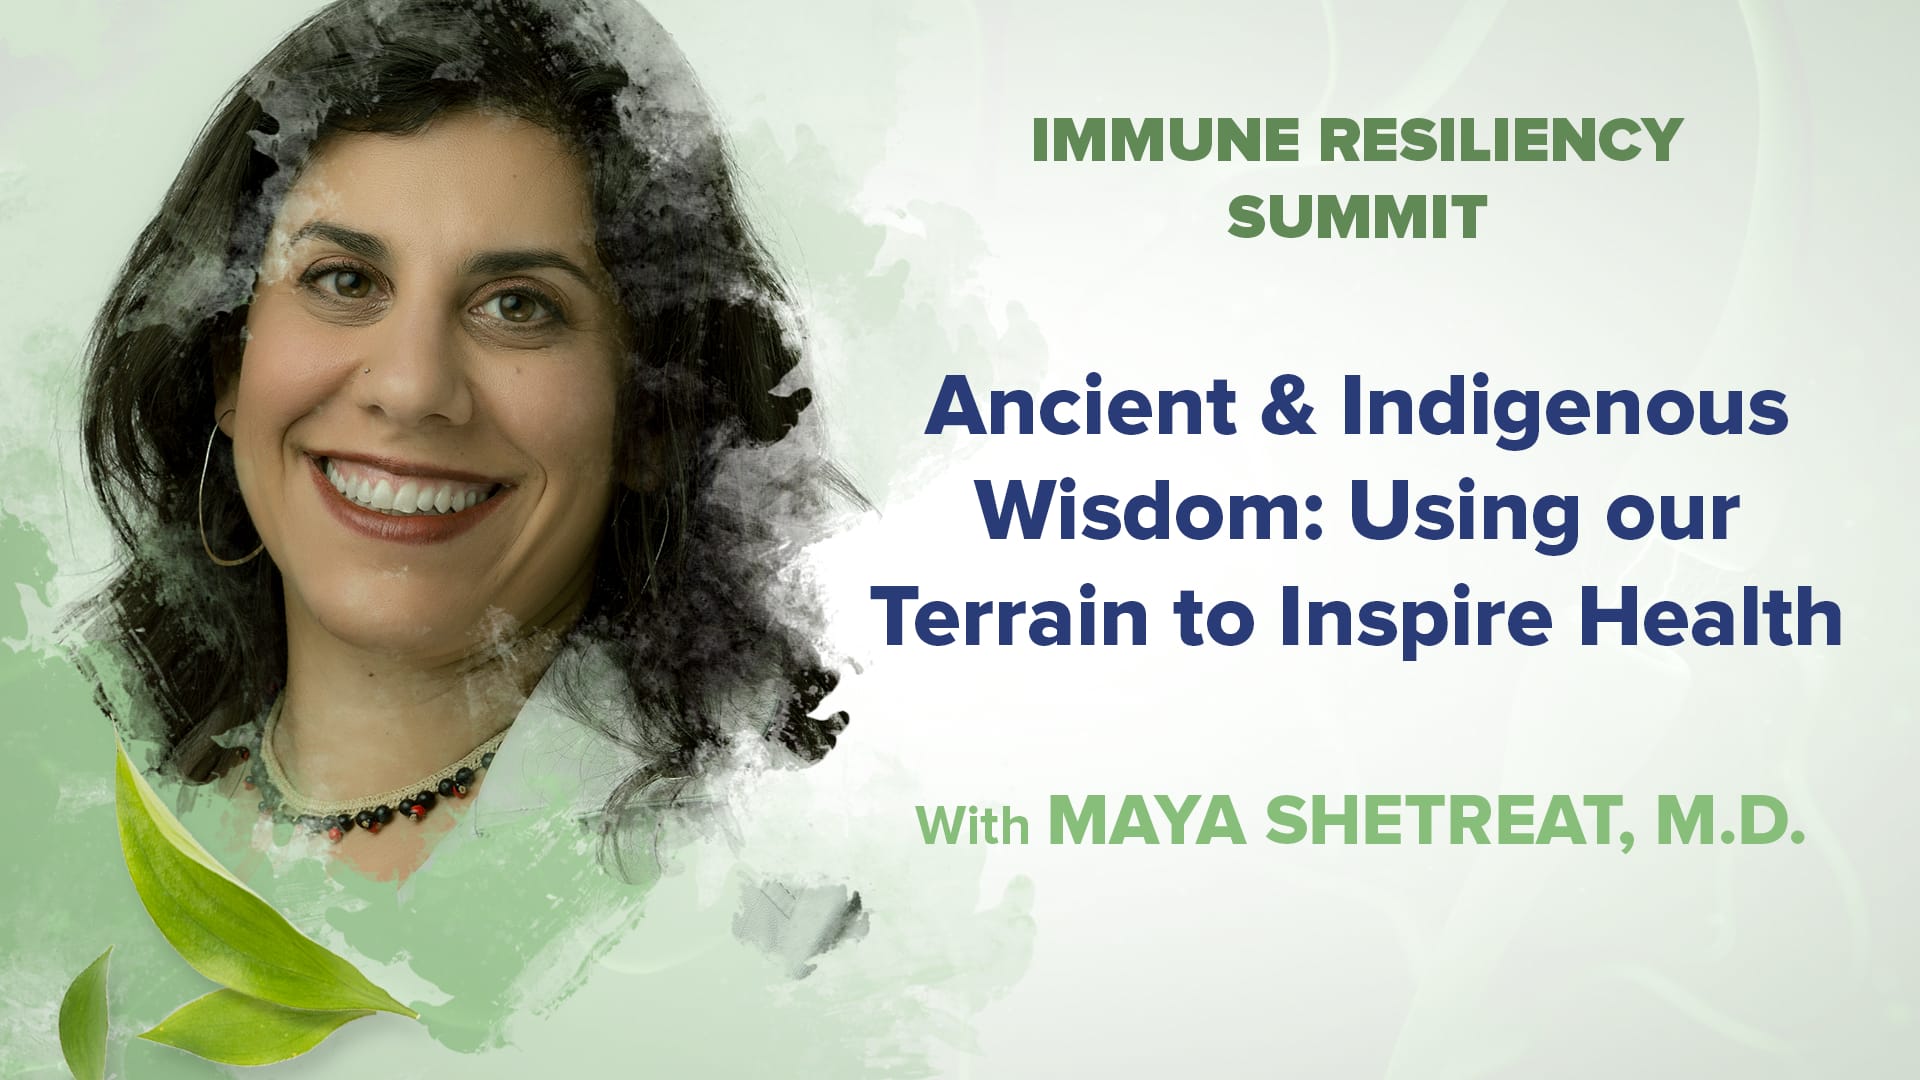 Ancient & Indigenous Wisdom: Using our Terrain to Inspire Health